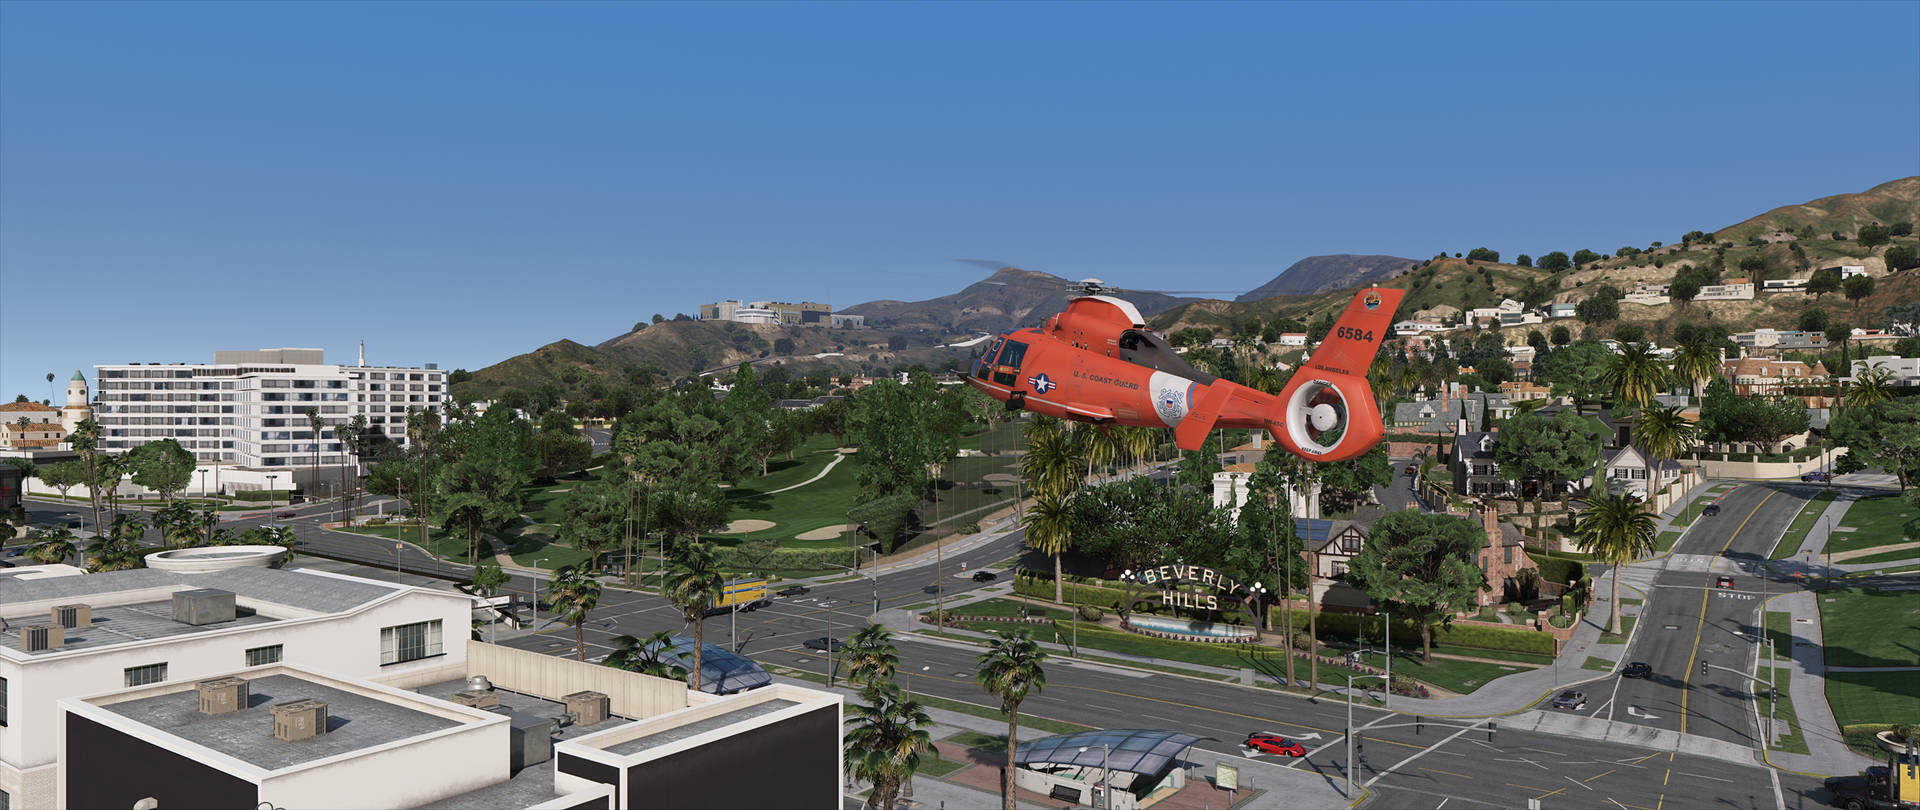 Grand Theft Auto V Red Chopper Flying